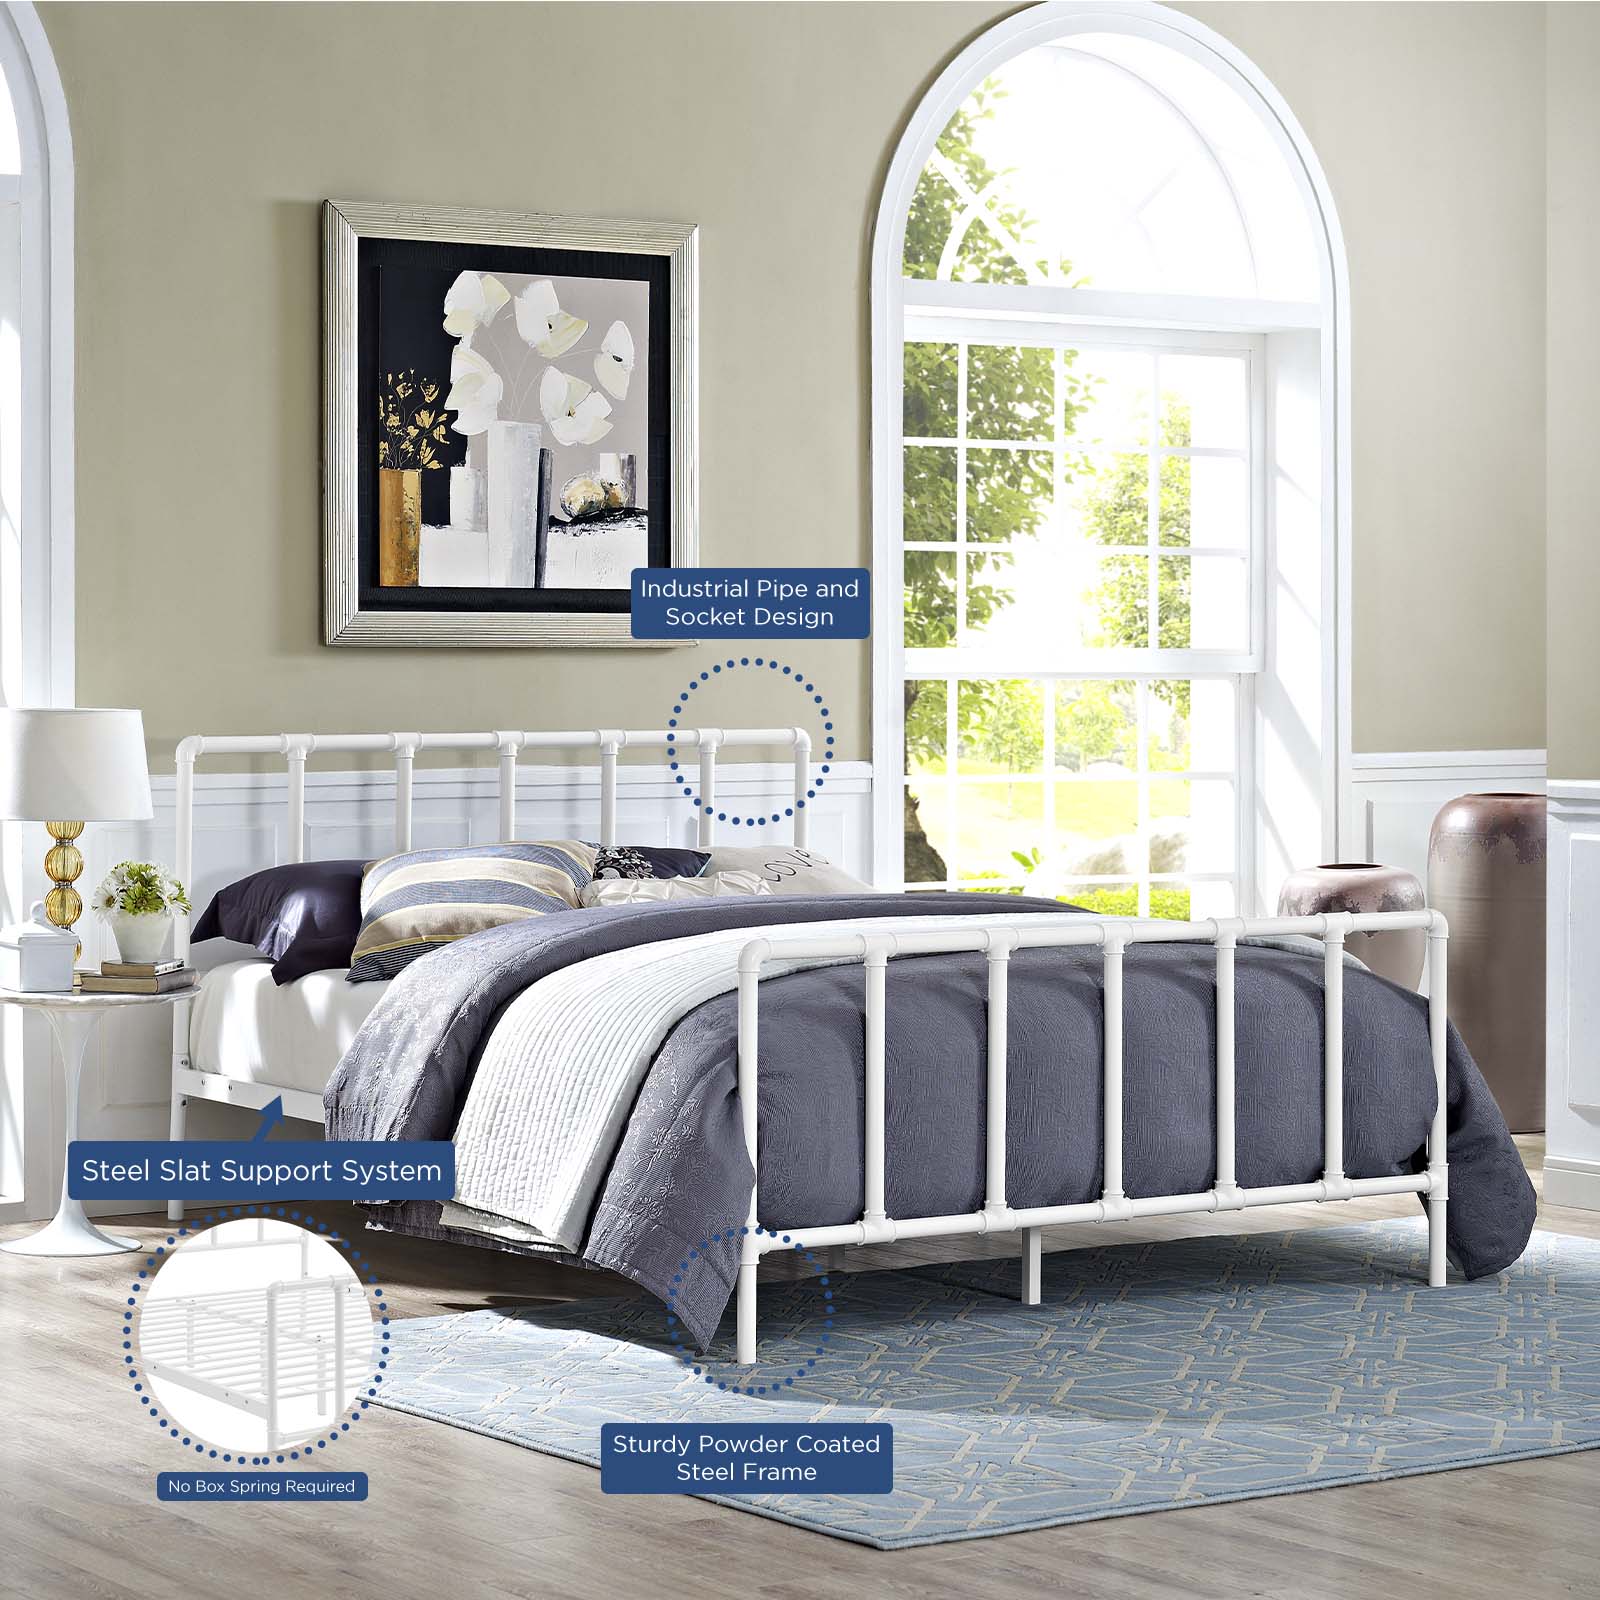 Modway Beds - Dower Queen Stainless Steel Bed White